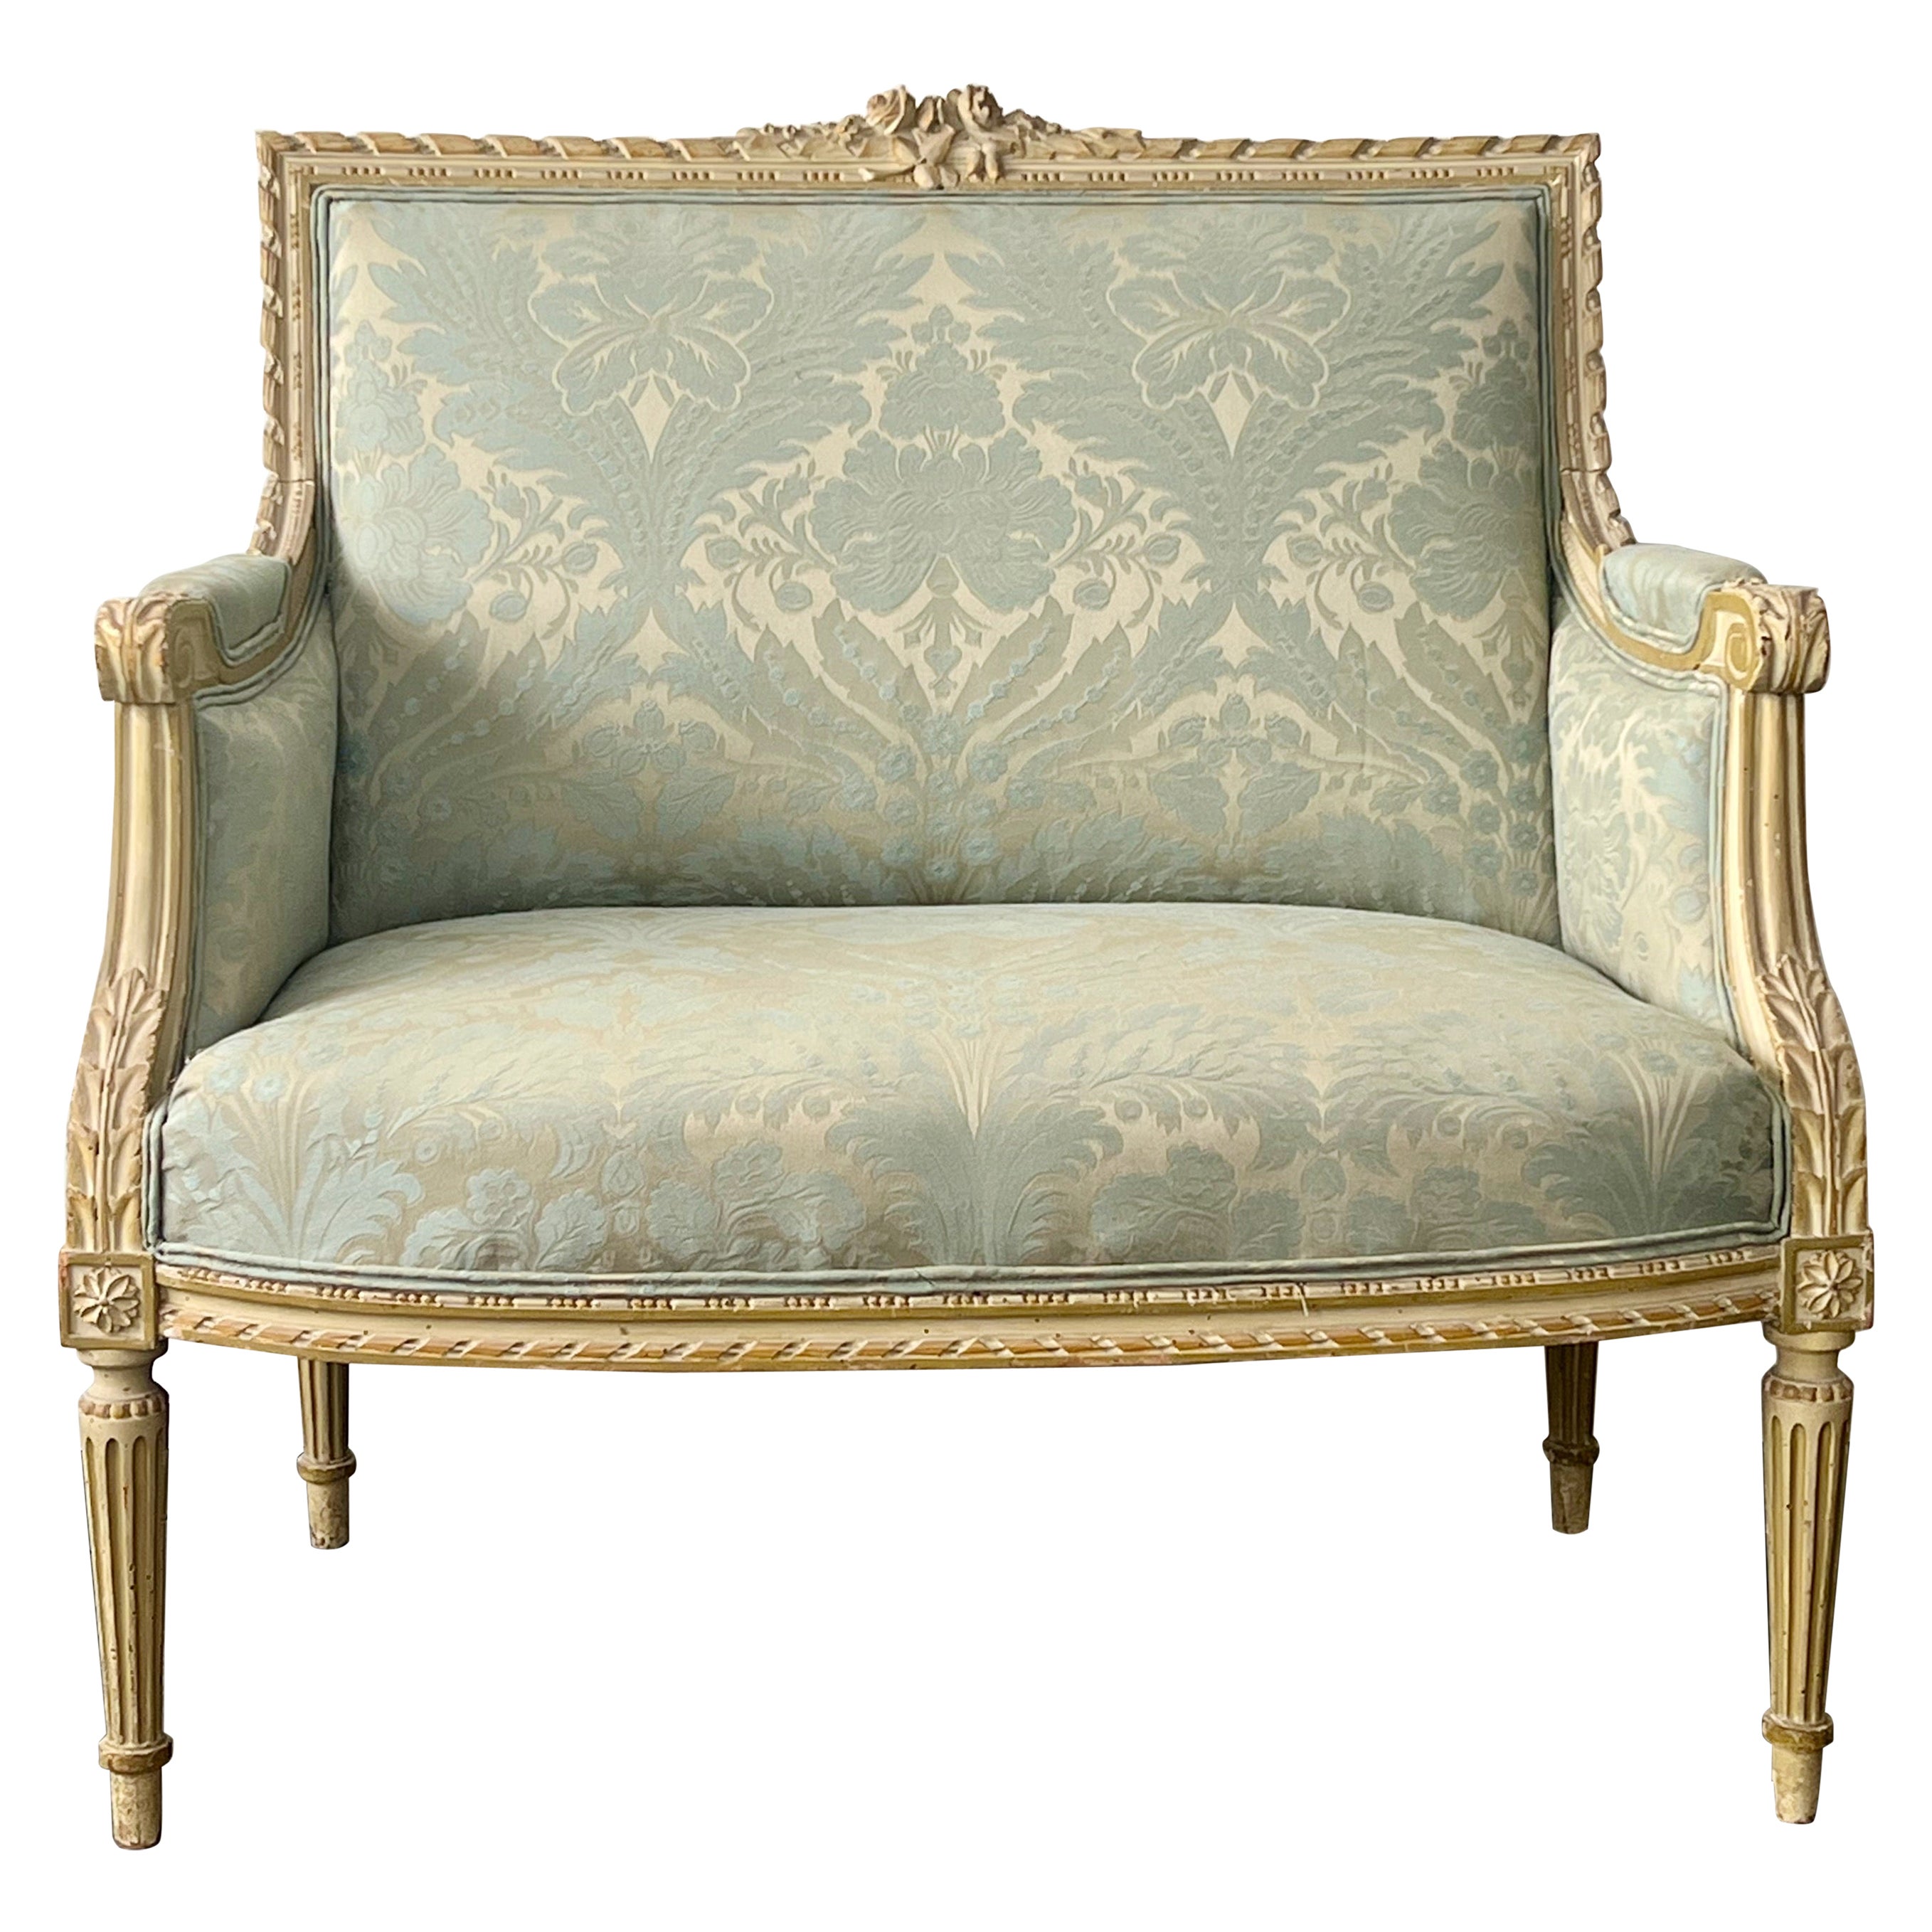 19th Century French Louis XVI Style Oversized Bergere Marquise Armchair For Sale